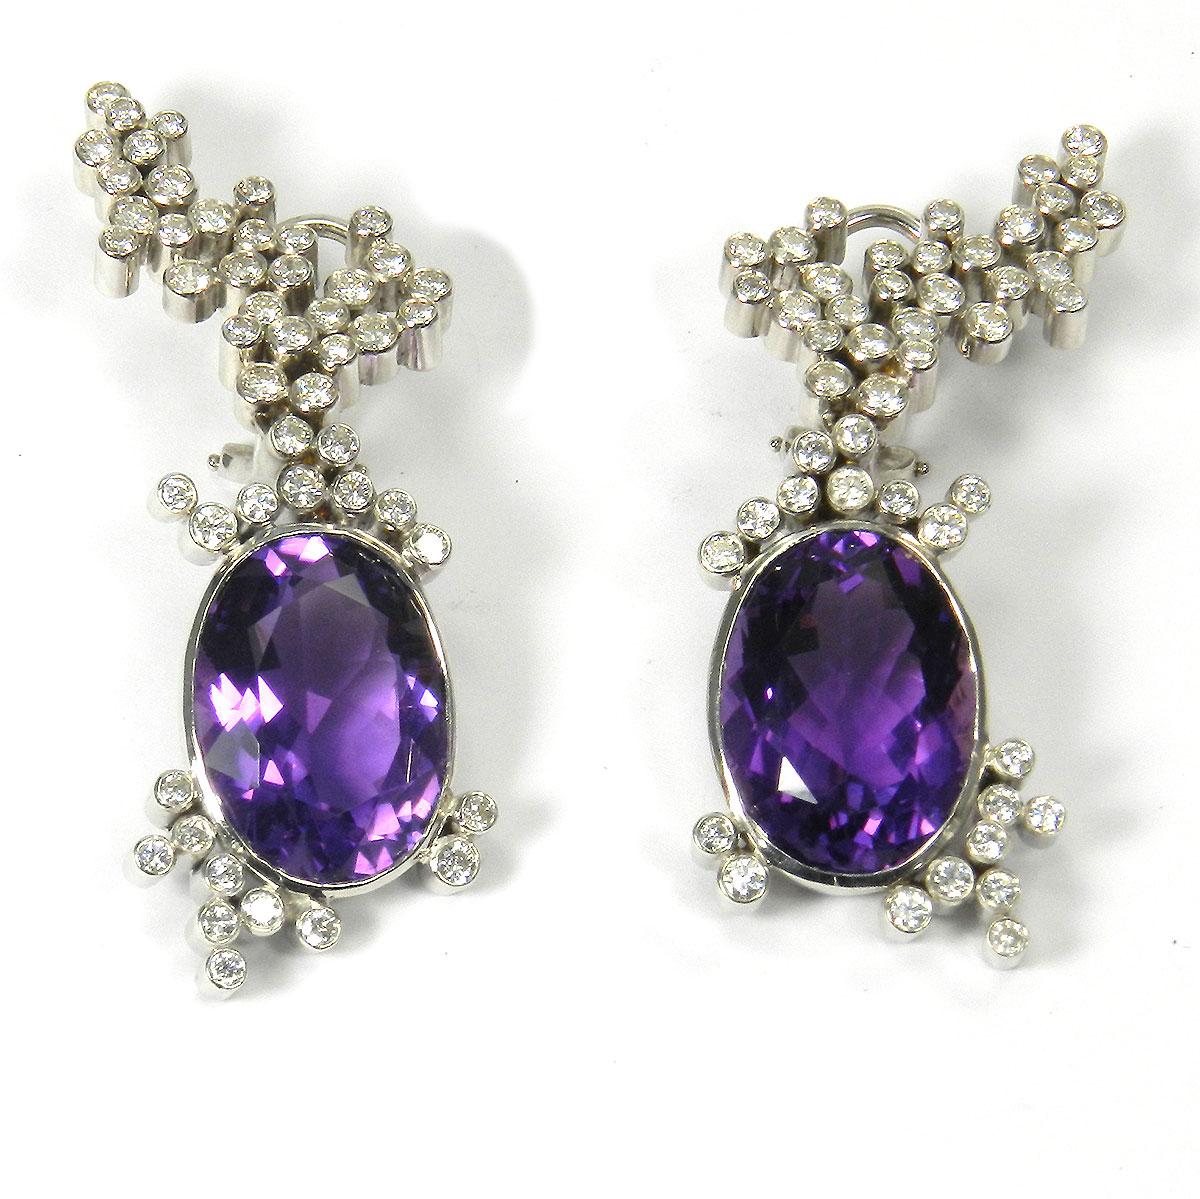 Contemporary Amethyst and 3.3 Carat Diamond 18 Karat White Gold Earrings For Sale